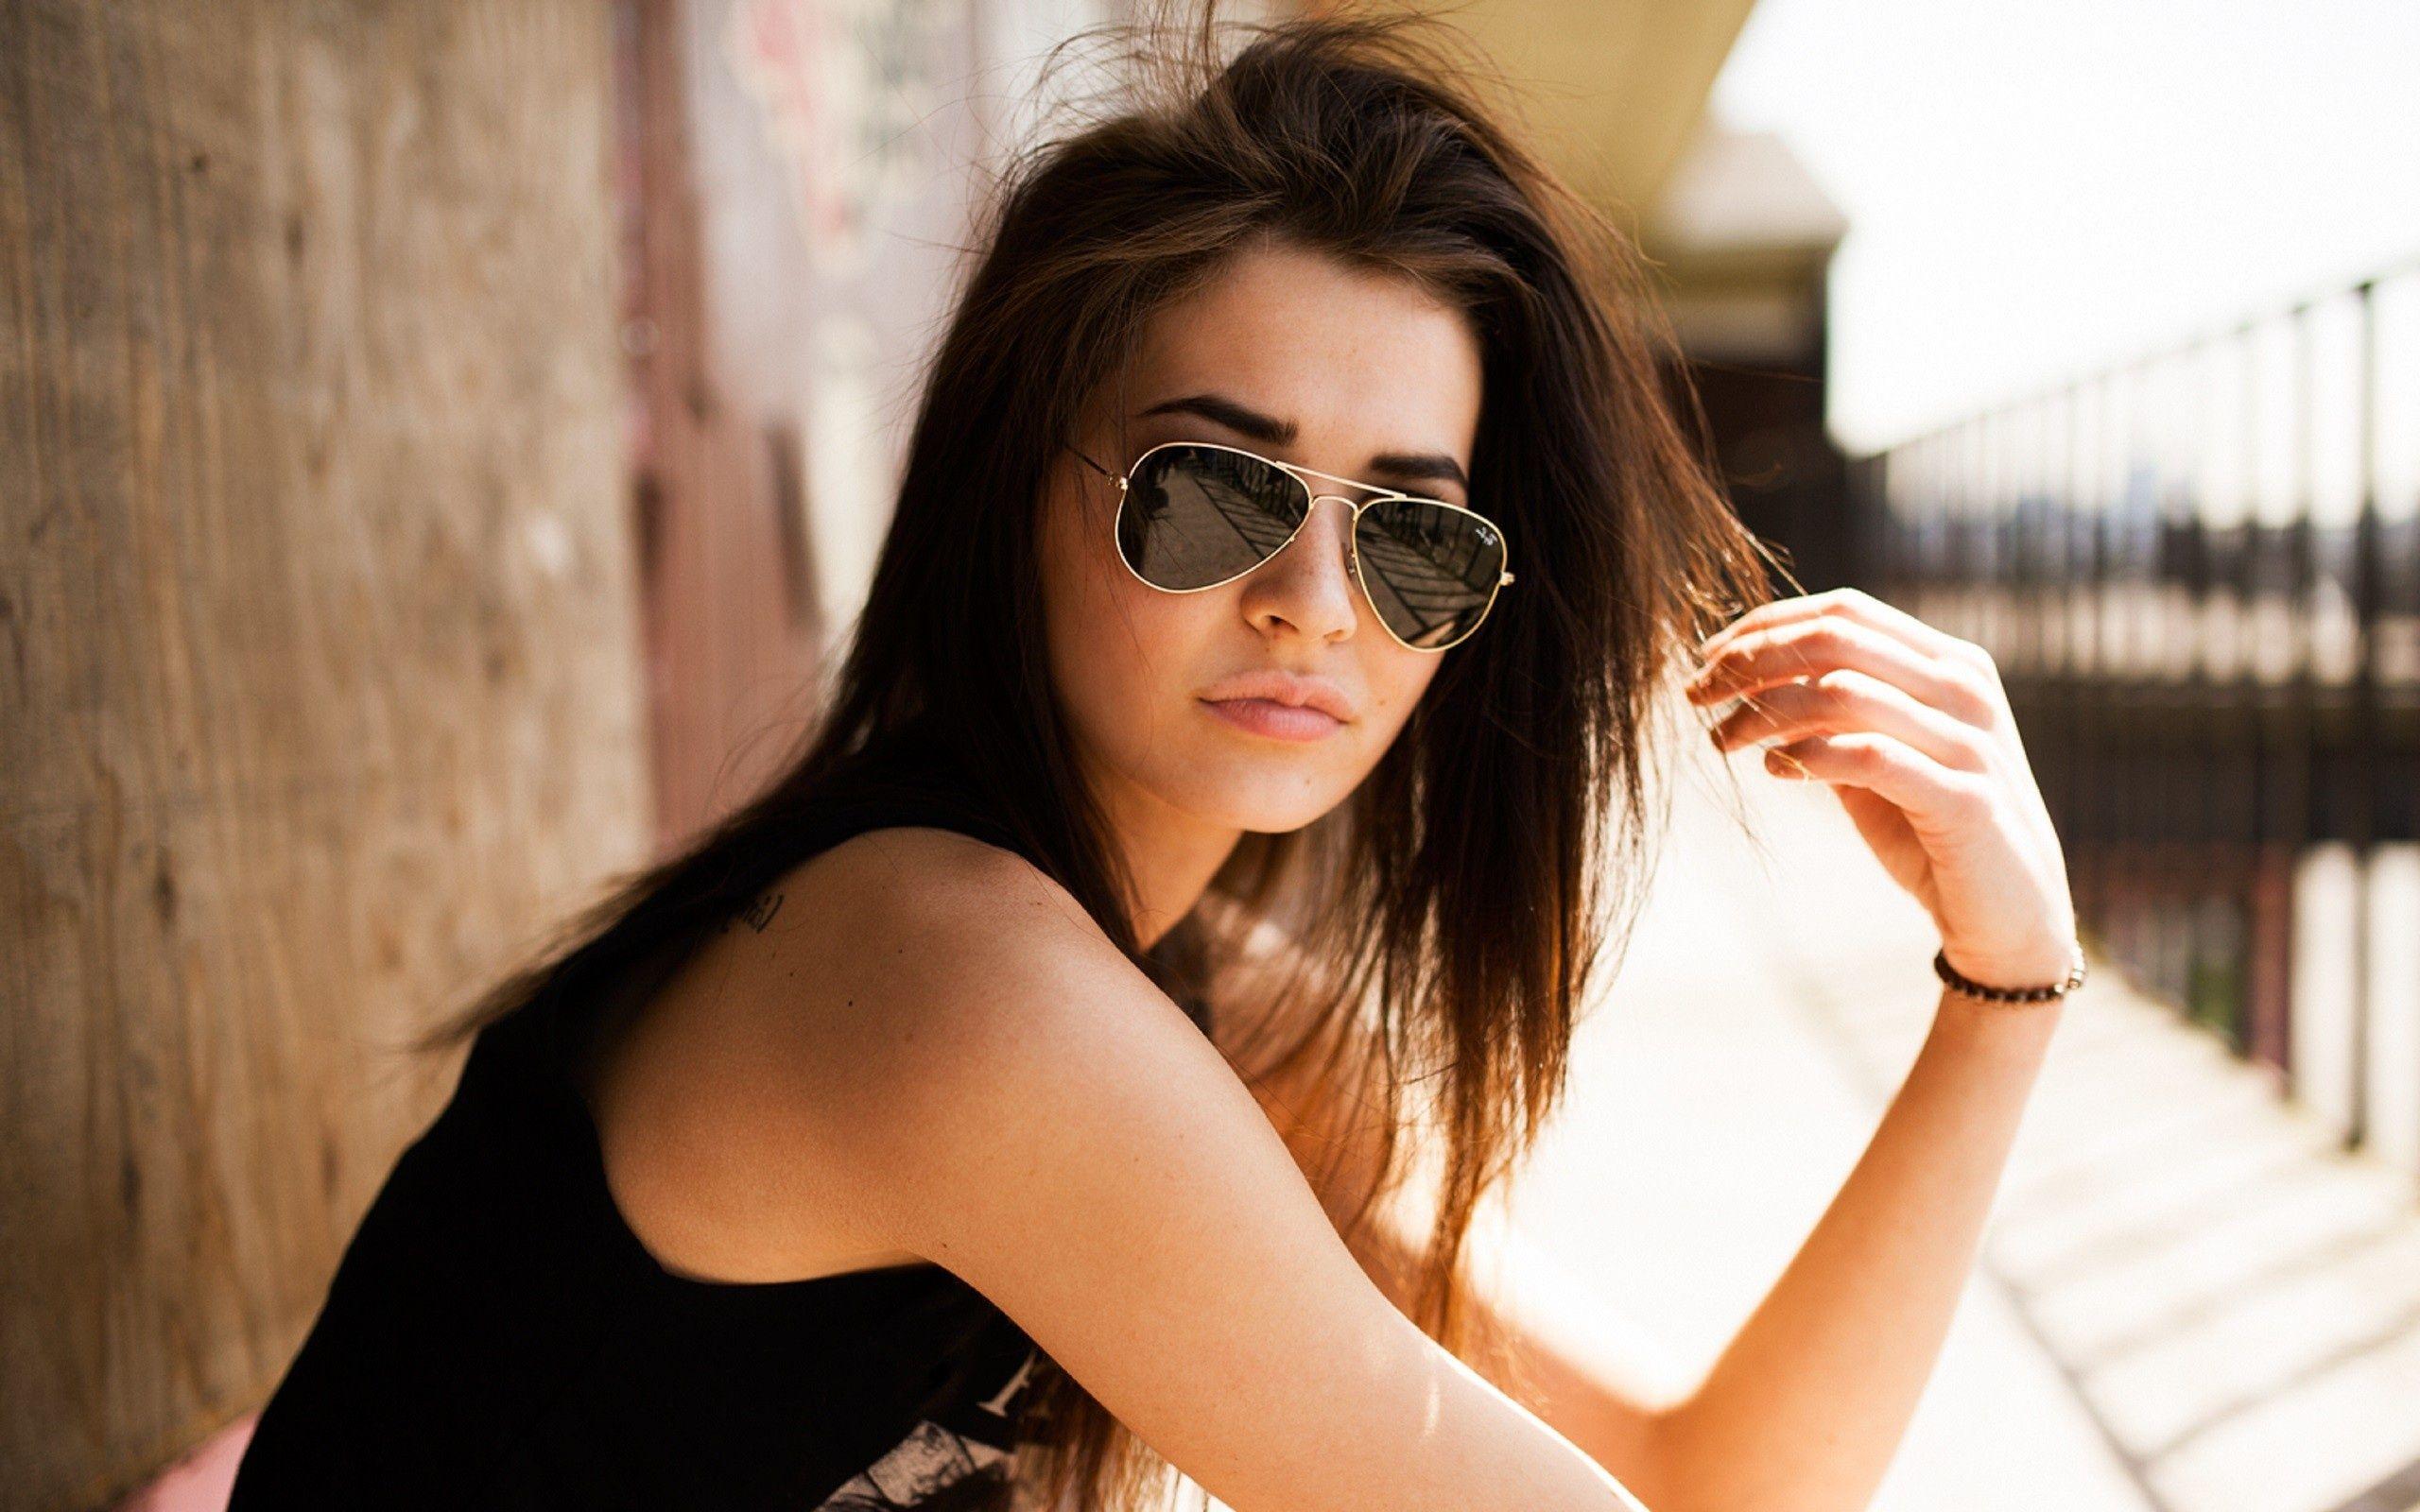 Wallpaper Girl with sunglasses 2560x1600 HD Picture, Image